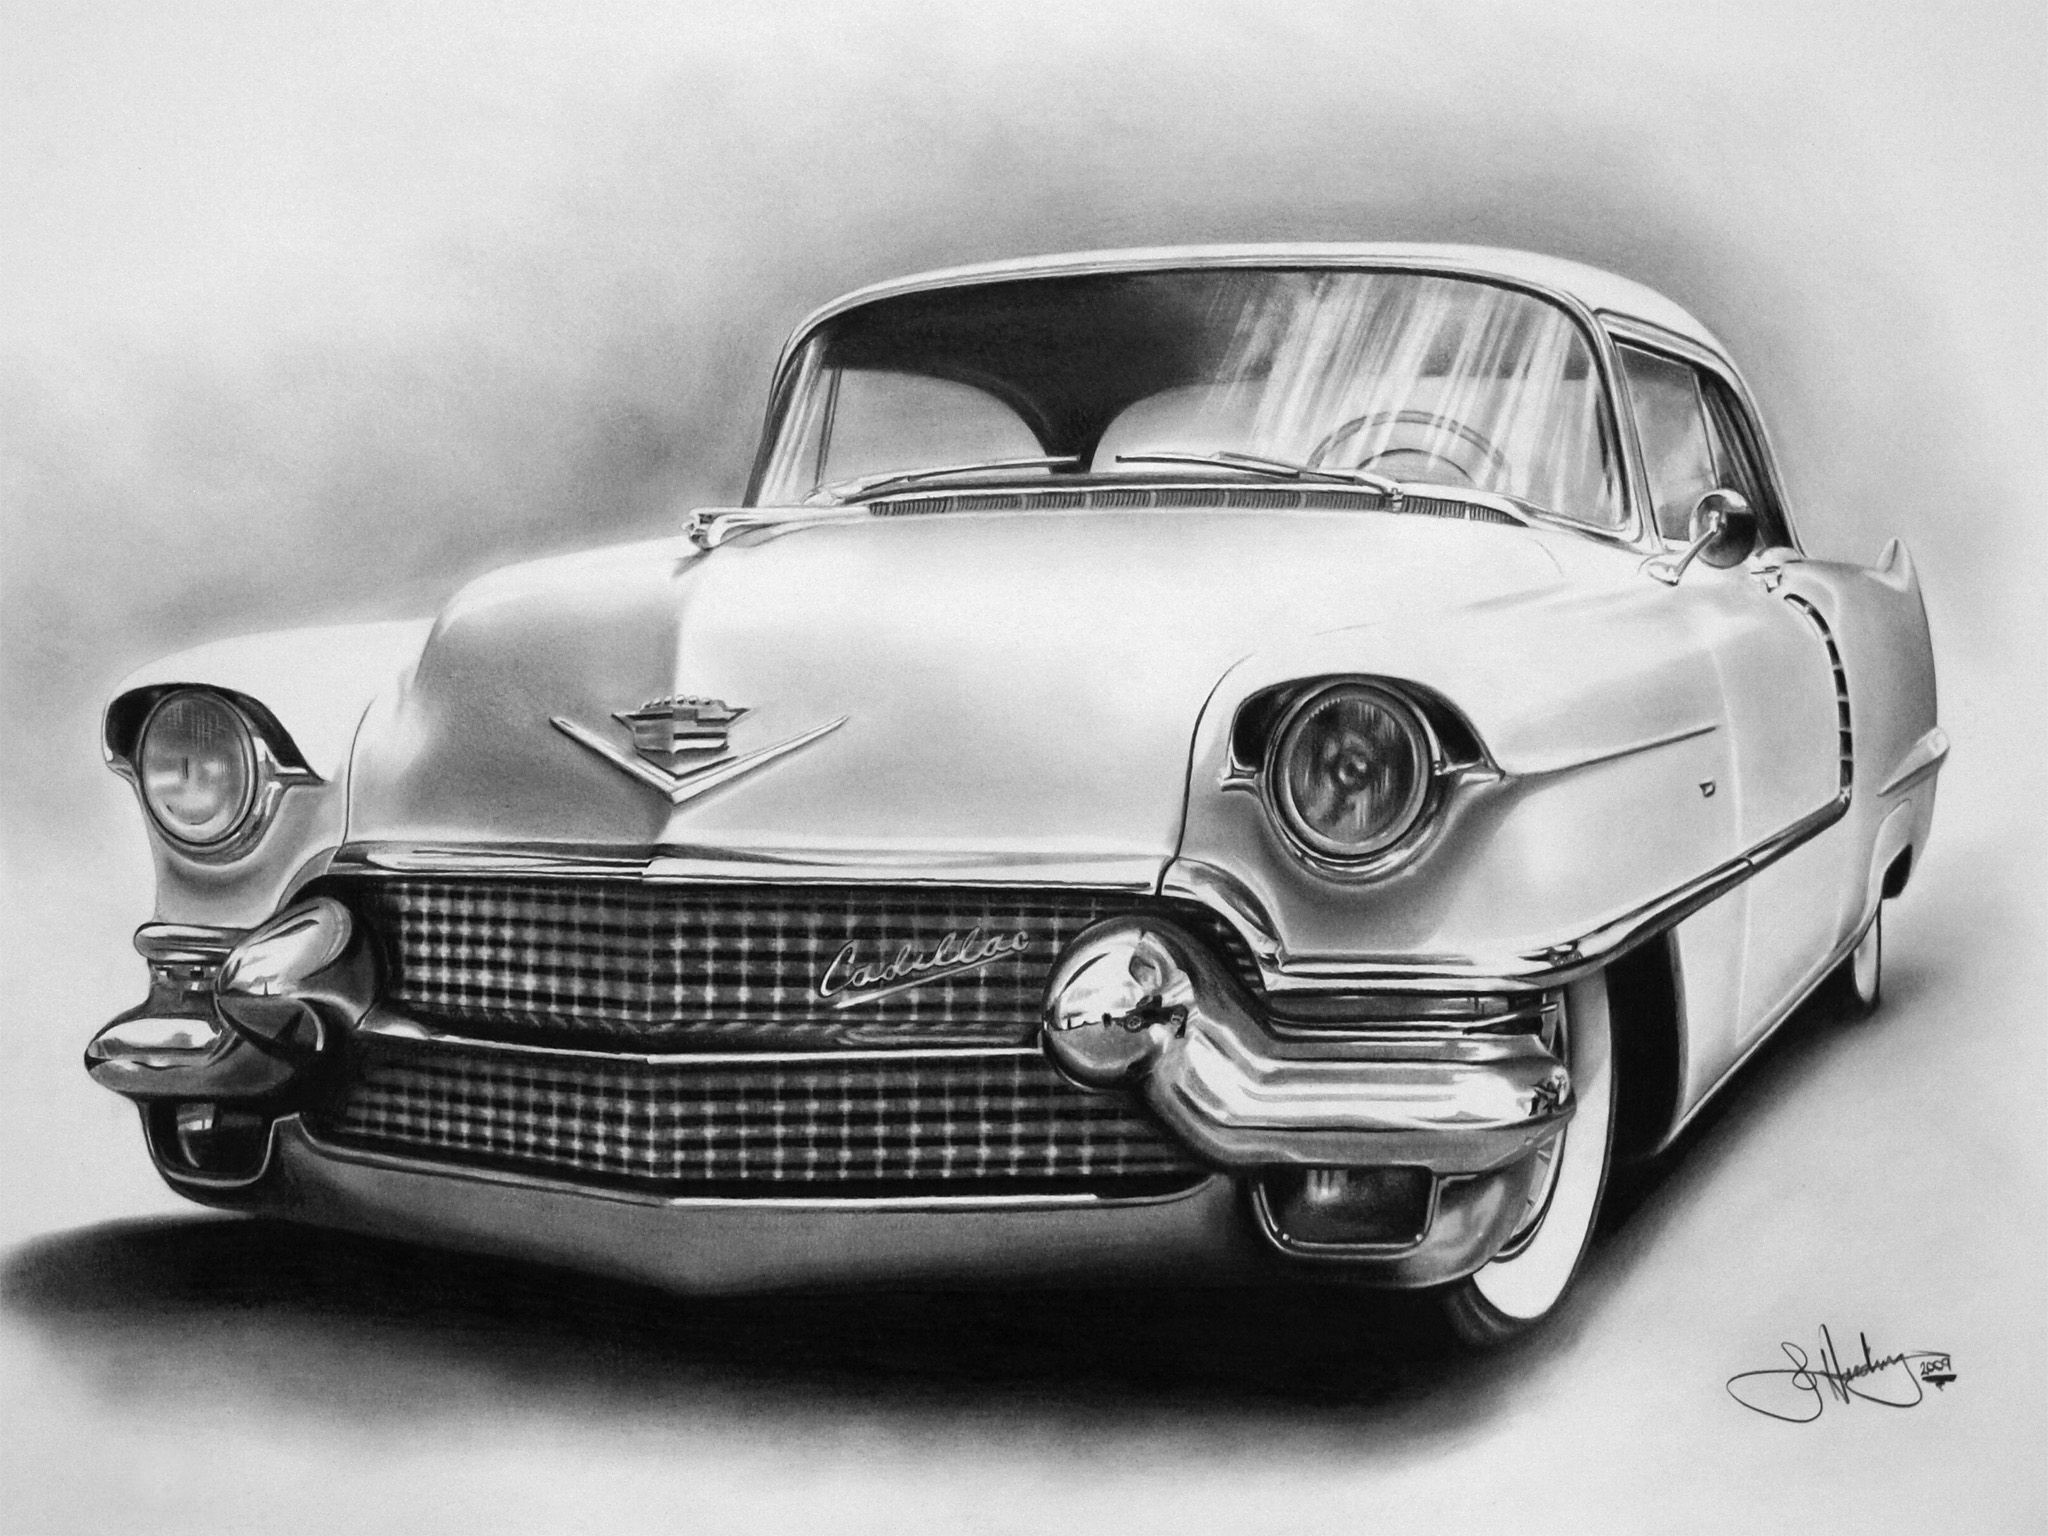 2048x1536 Cadillac Image Pencil Drawing Wallpaper - http://www.gbwallpapers.com/